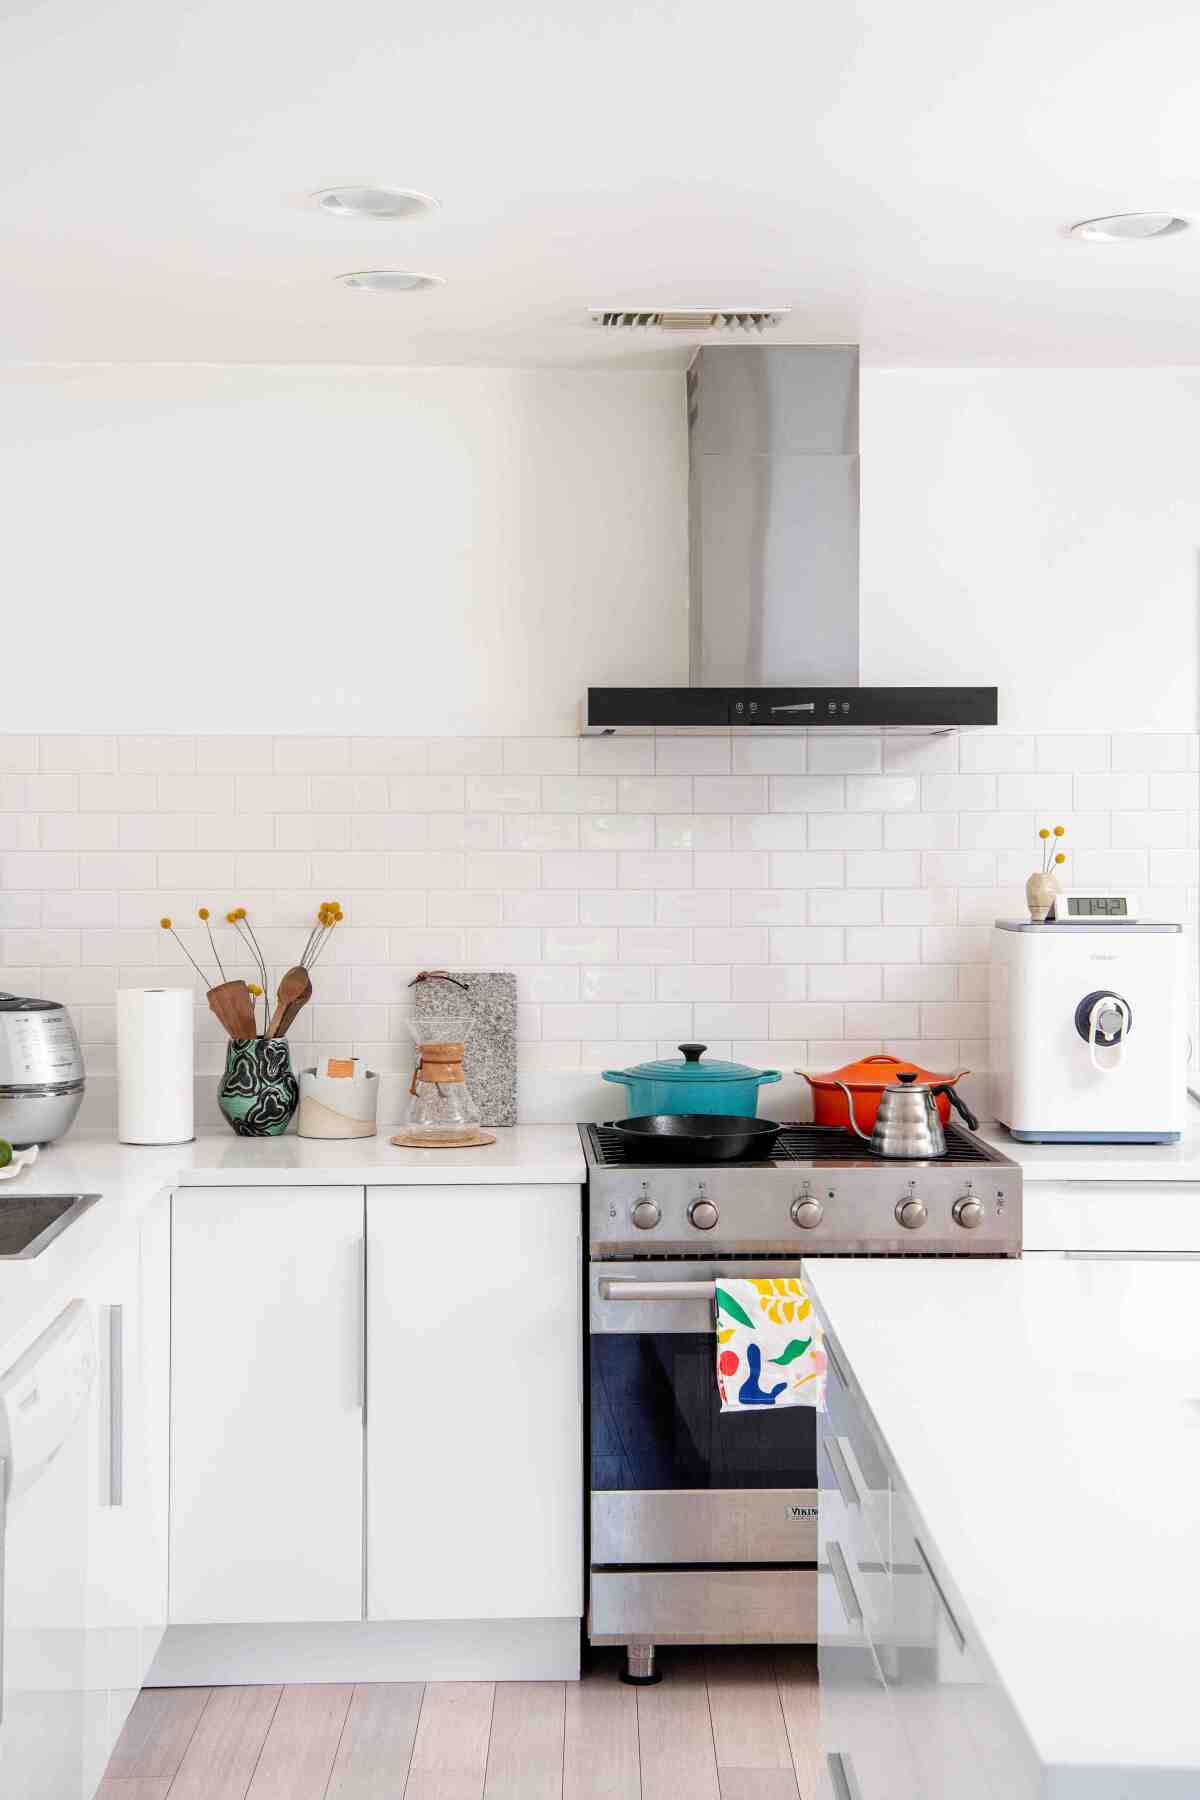 Ted Vadakan and Angie Myung's kitchen in Mt. Washington features inexpensive Ikea cabinets.